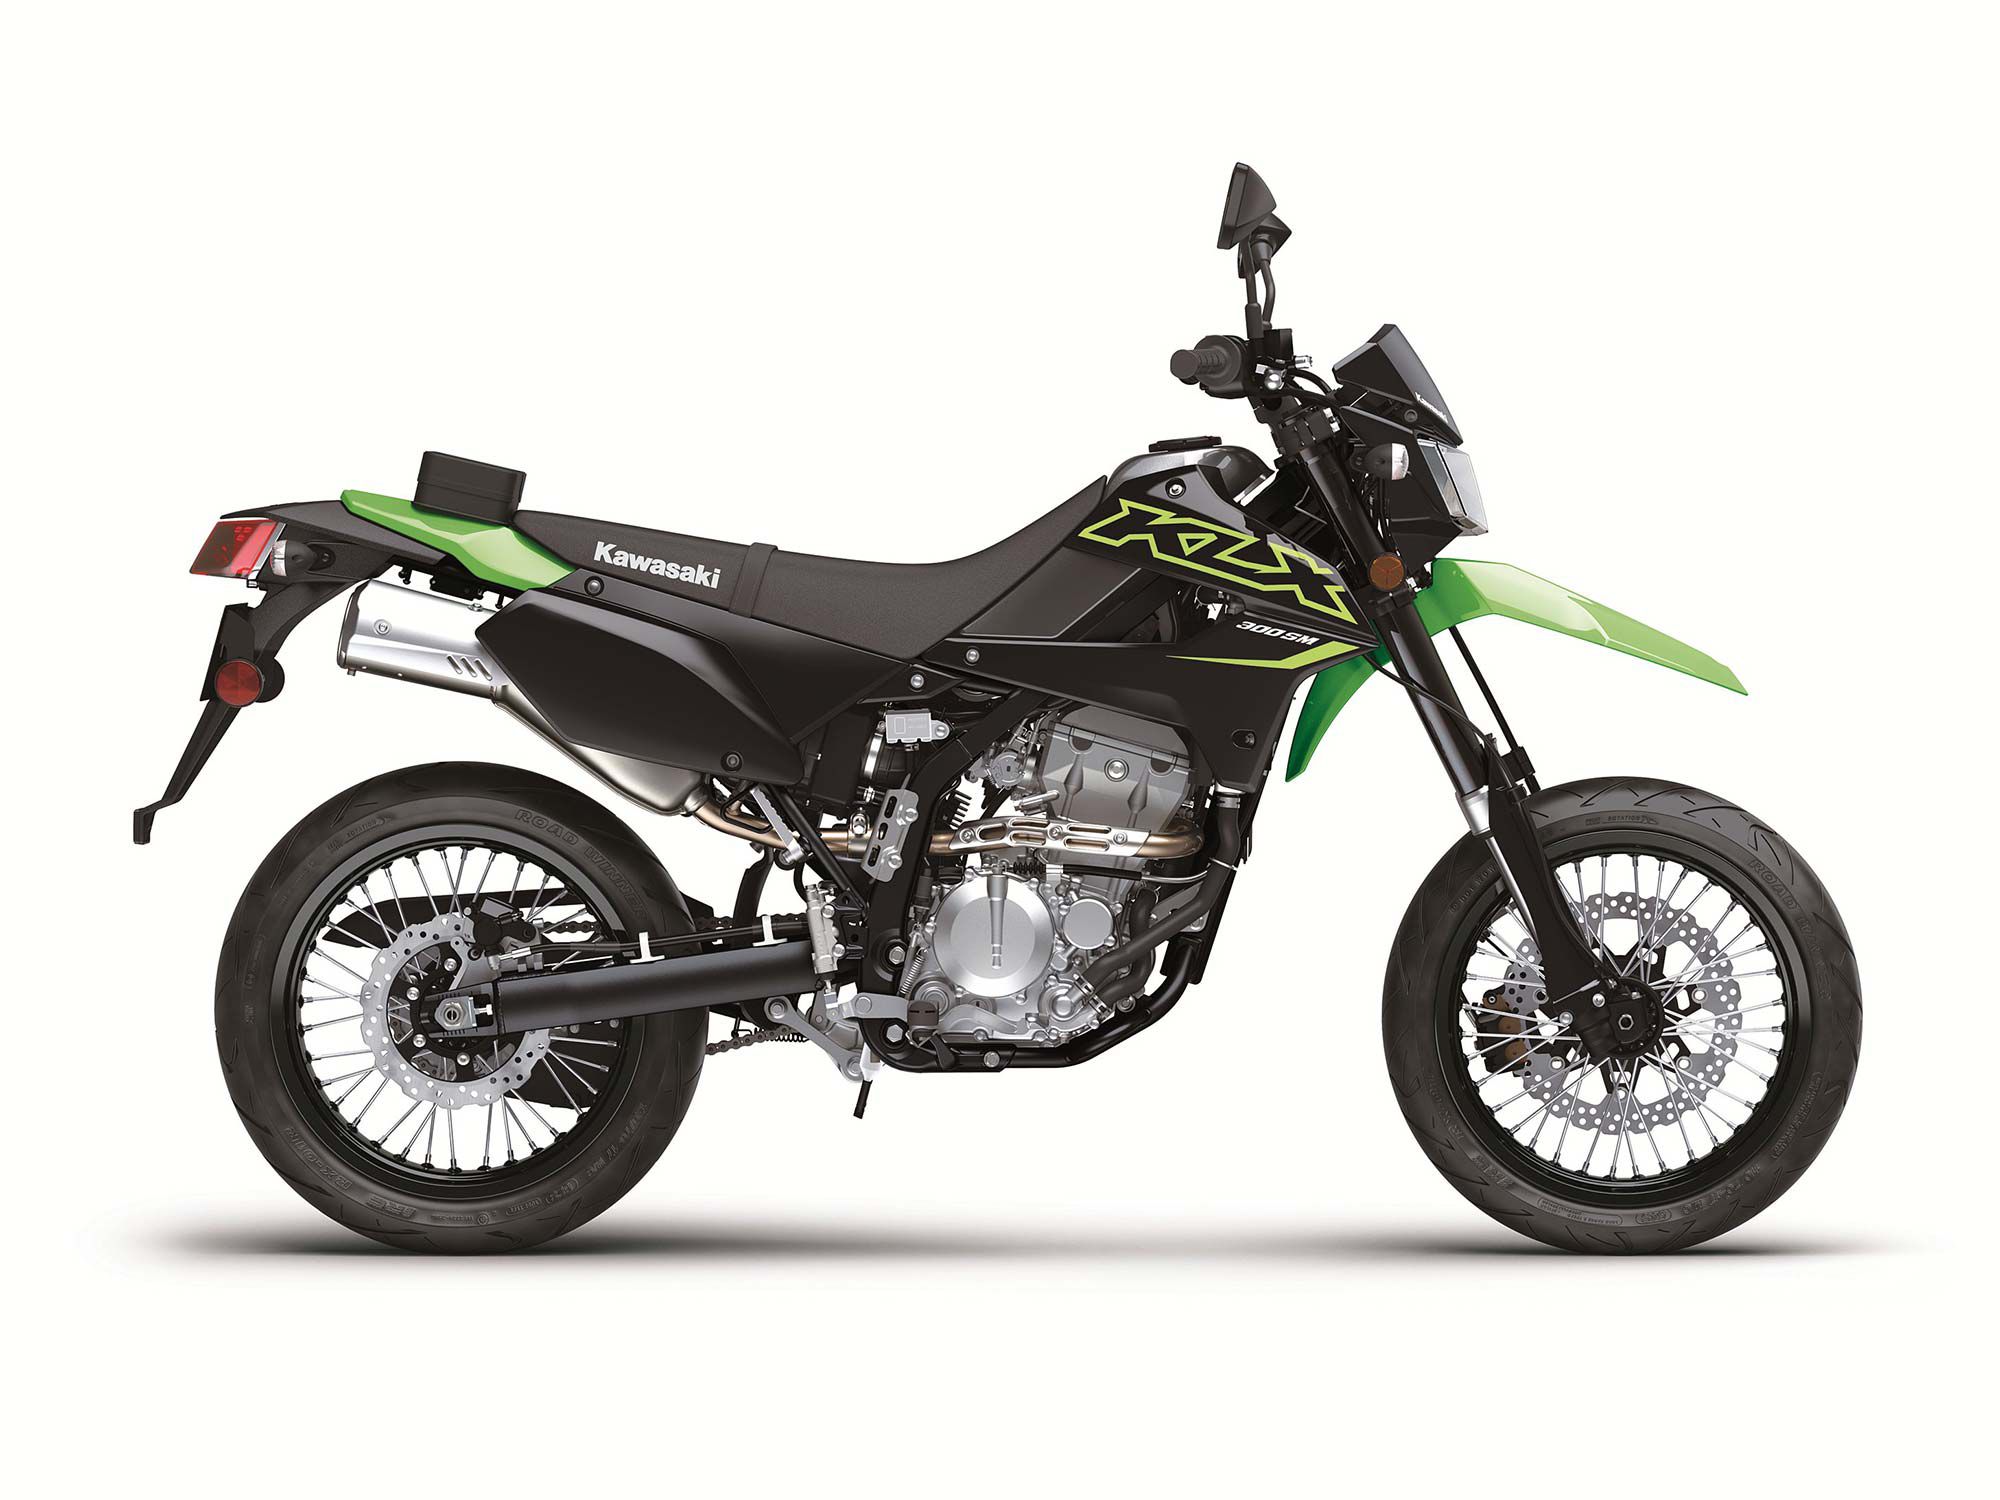 The KLX300SM retails for a relatively low $6,199 MSRP.